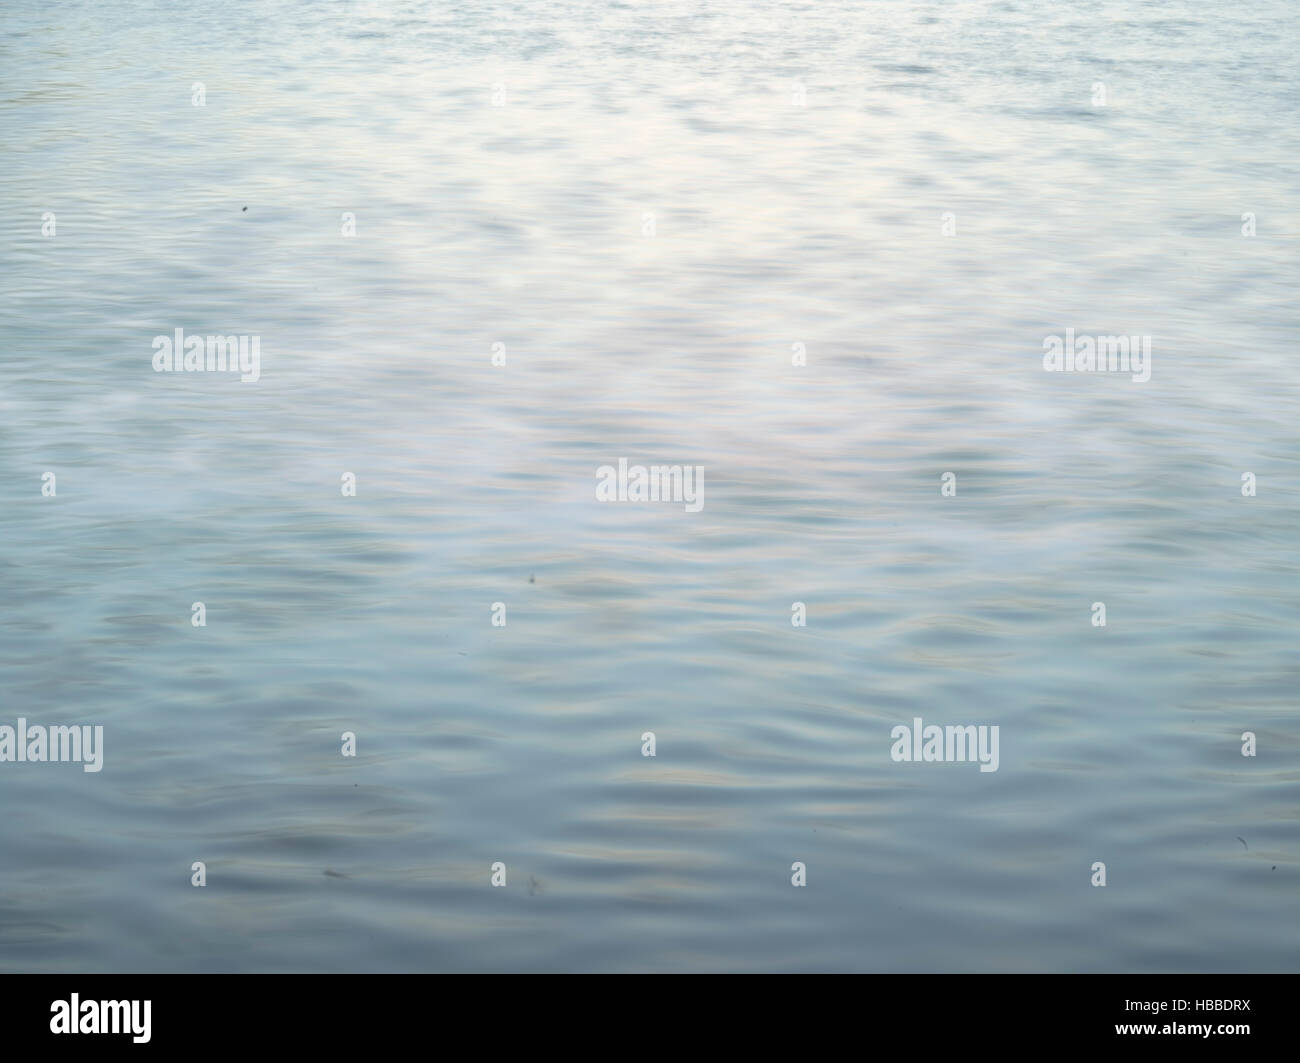 A photograph of nothing but sea water Stock Photo